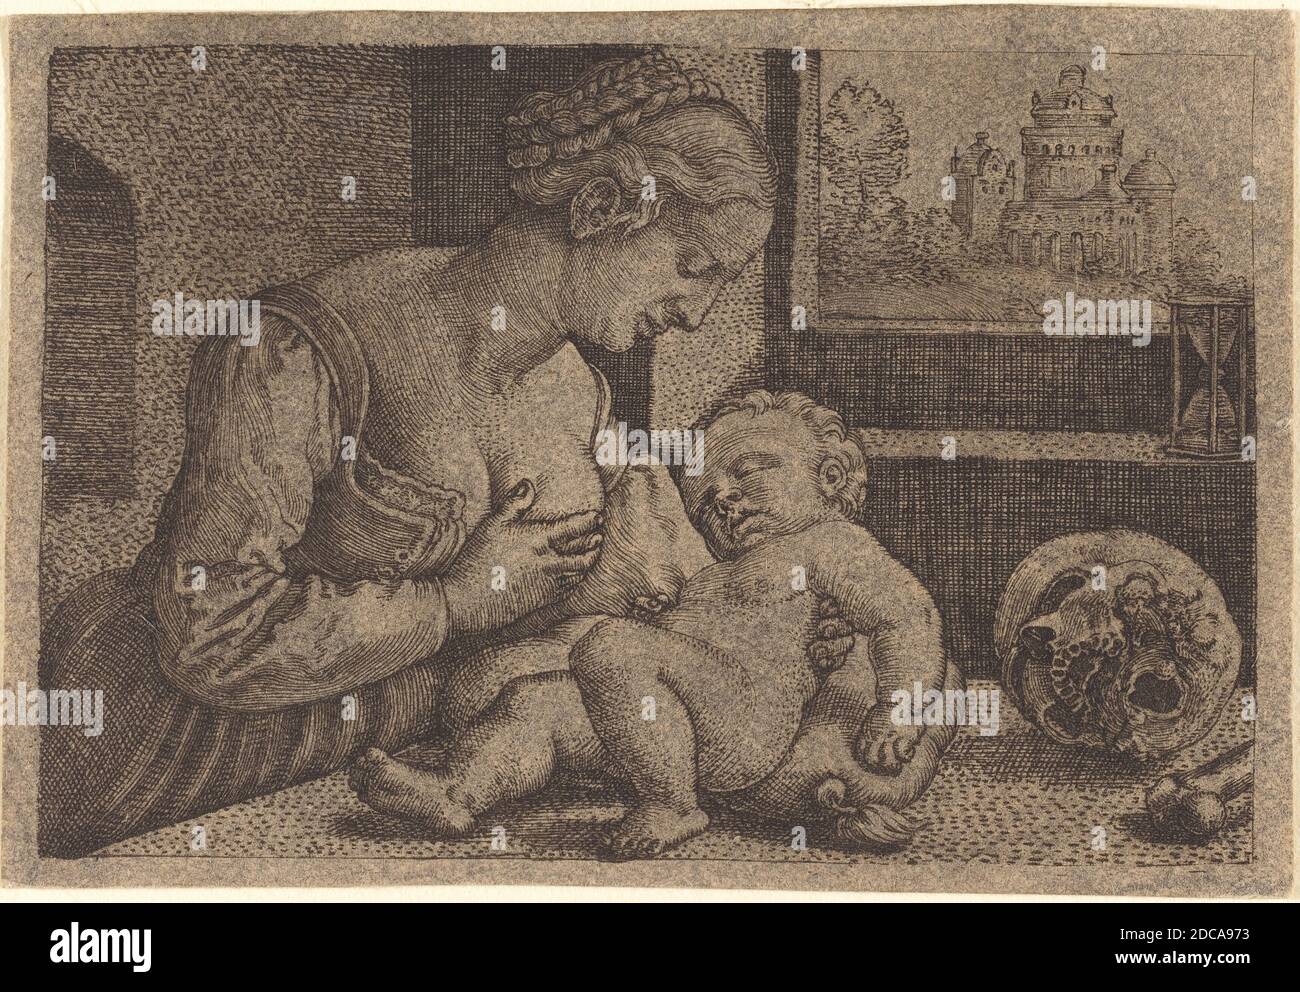 Barthel Beham, (artist), German, 1502 - 1540, Madonna with Skull, engraving on paper tinted with gray wash Stock Photo